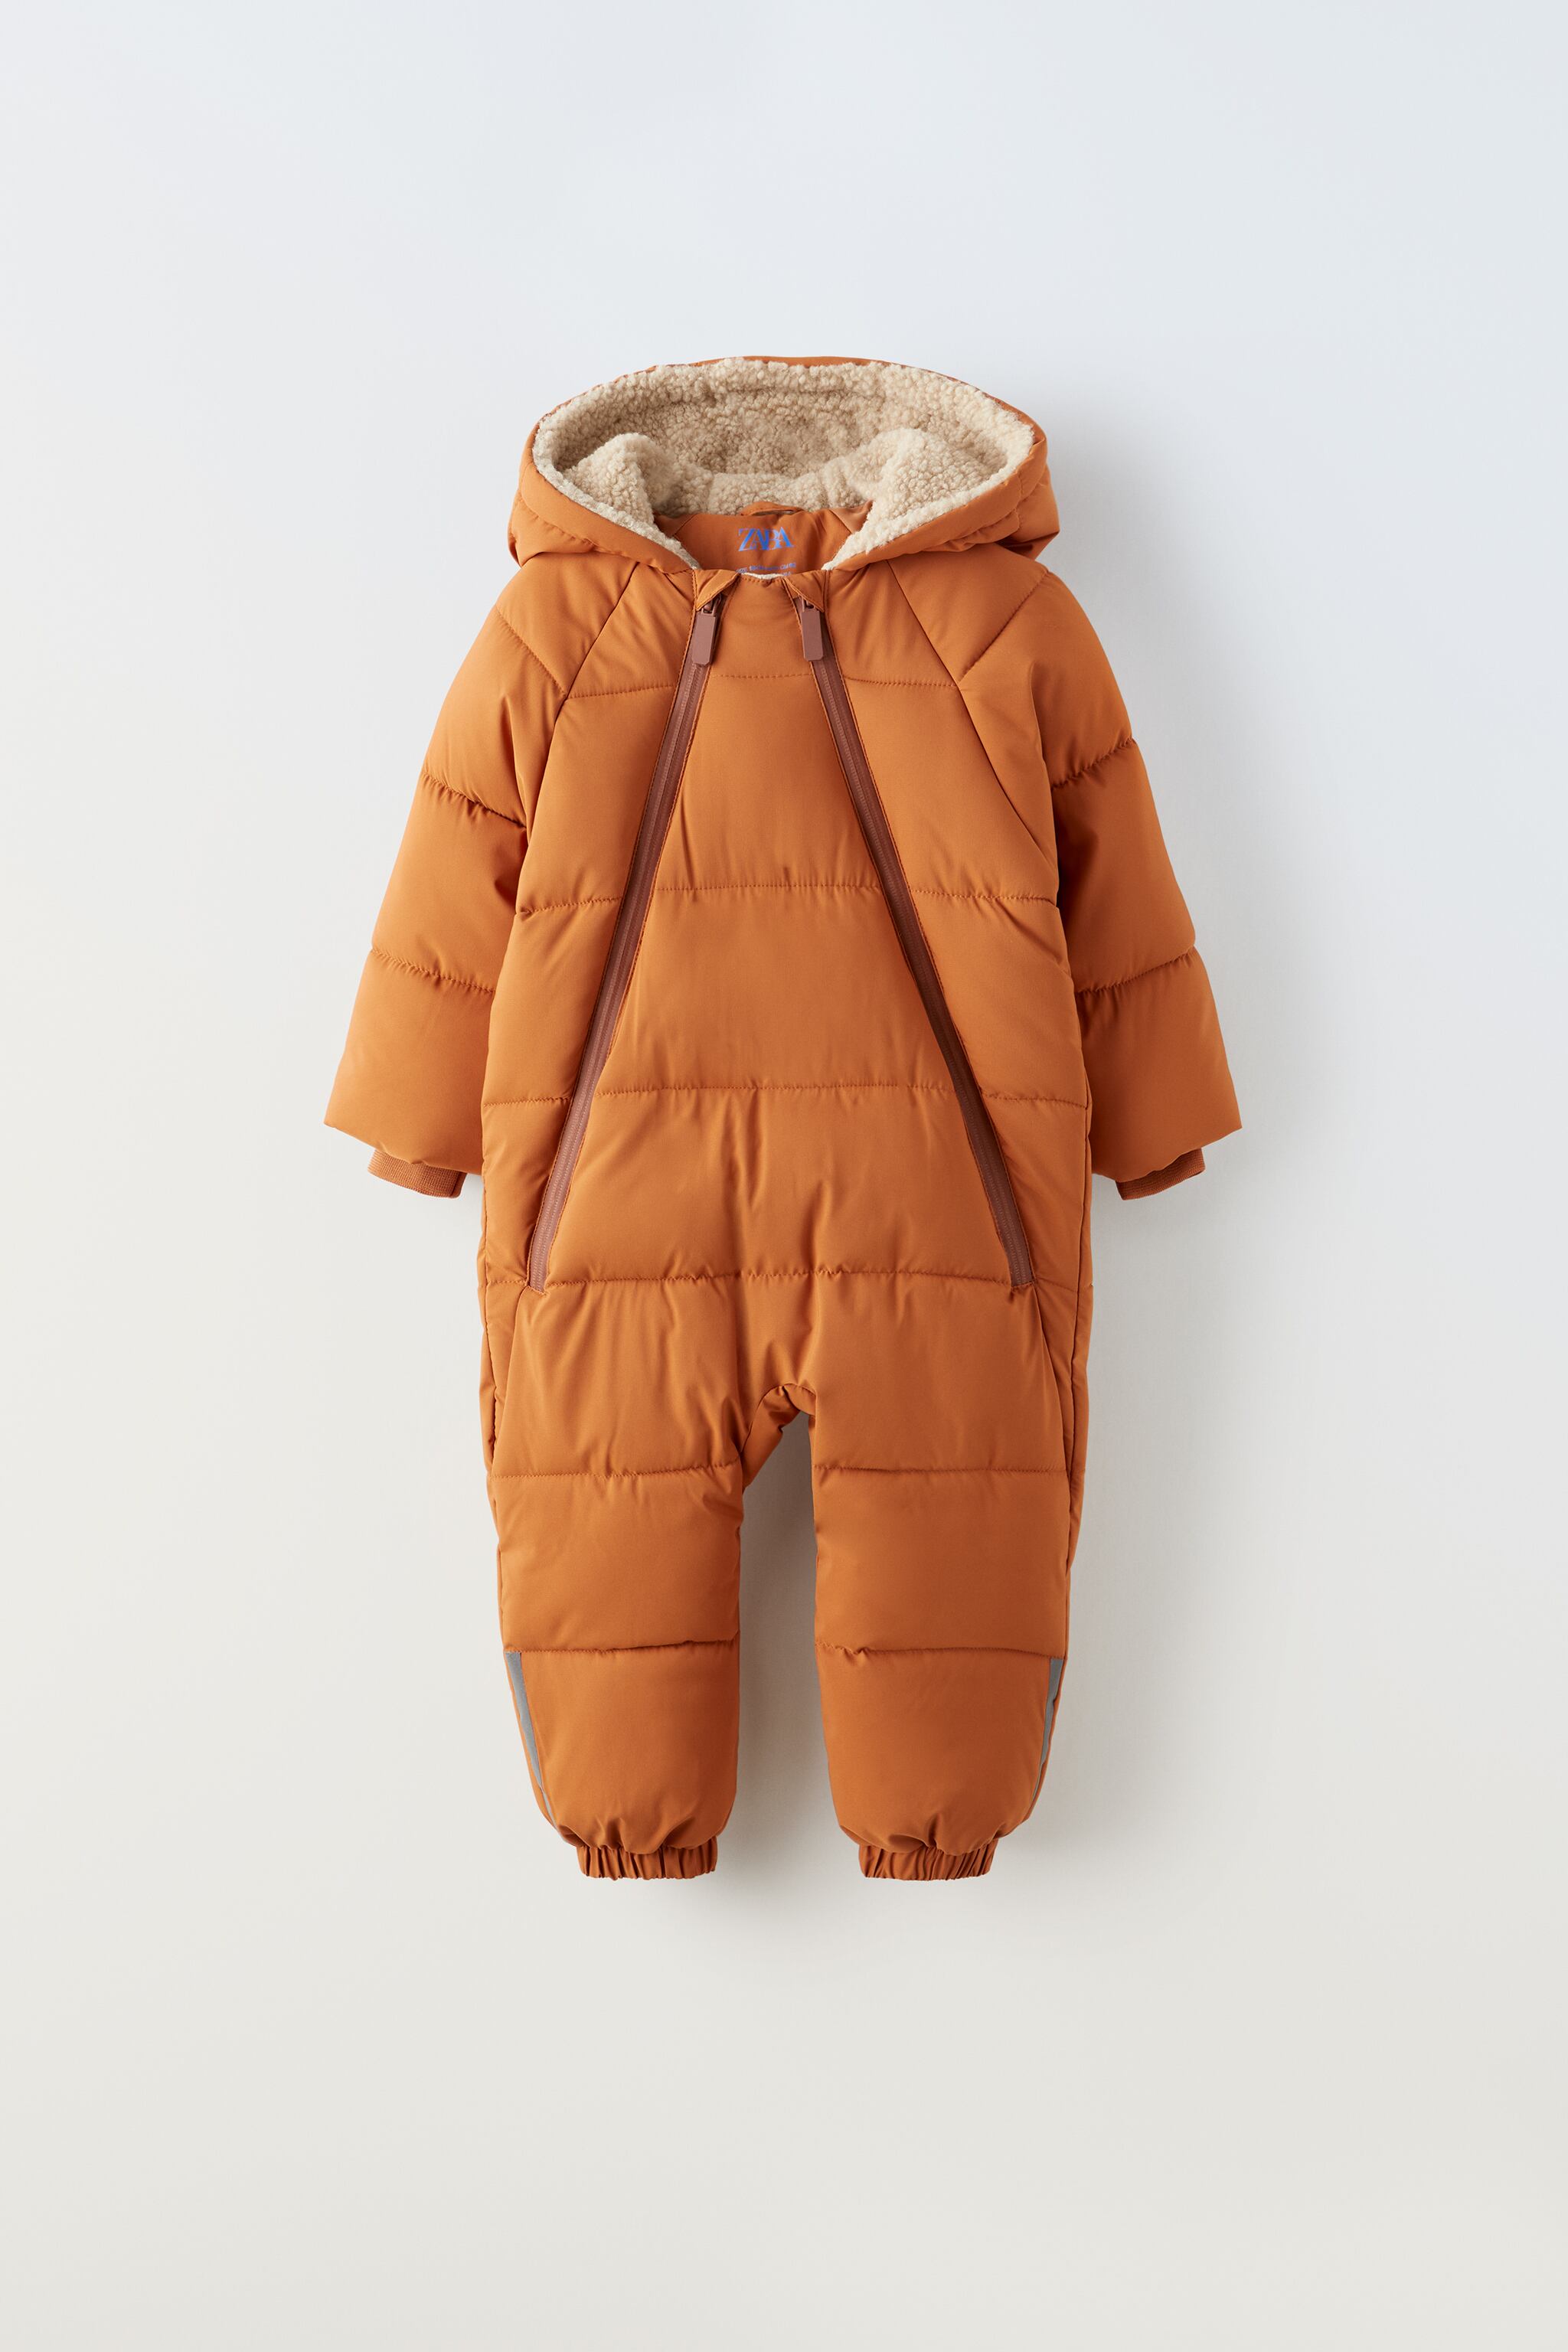 WATER REPELLENT AND WIND RESISTANT PADDED SNOW SUIT SKI COLLECTION